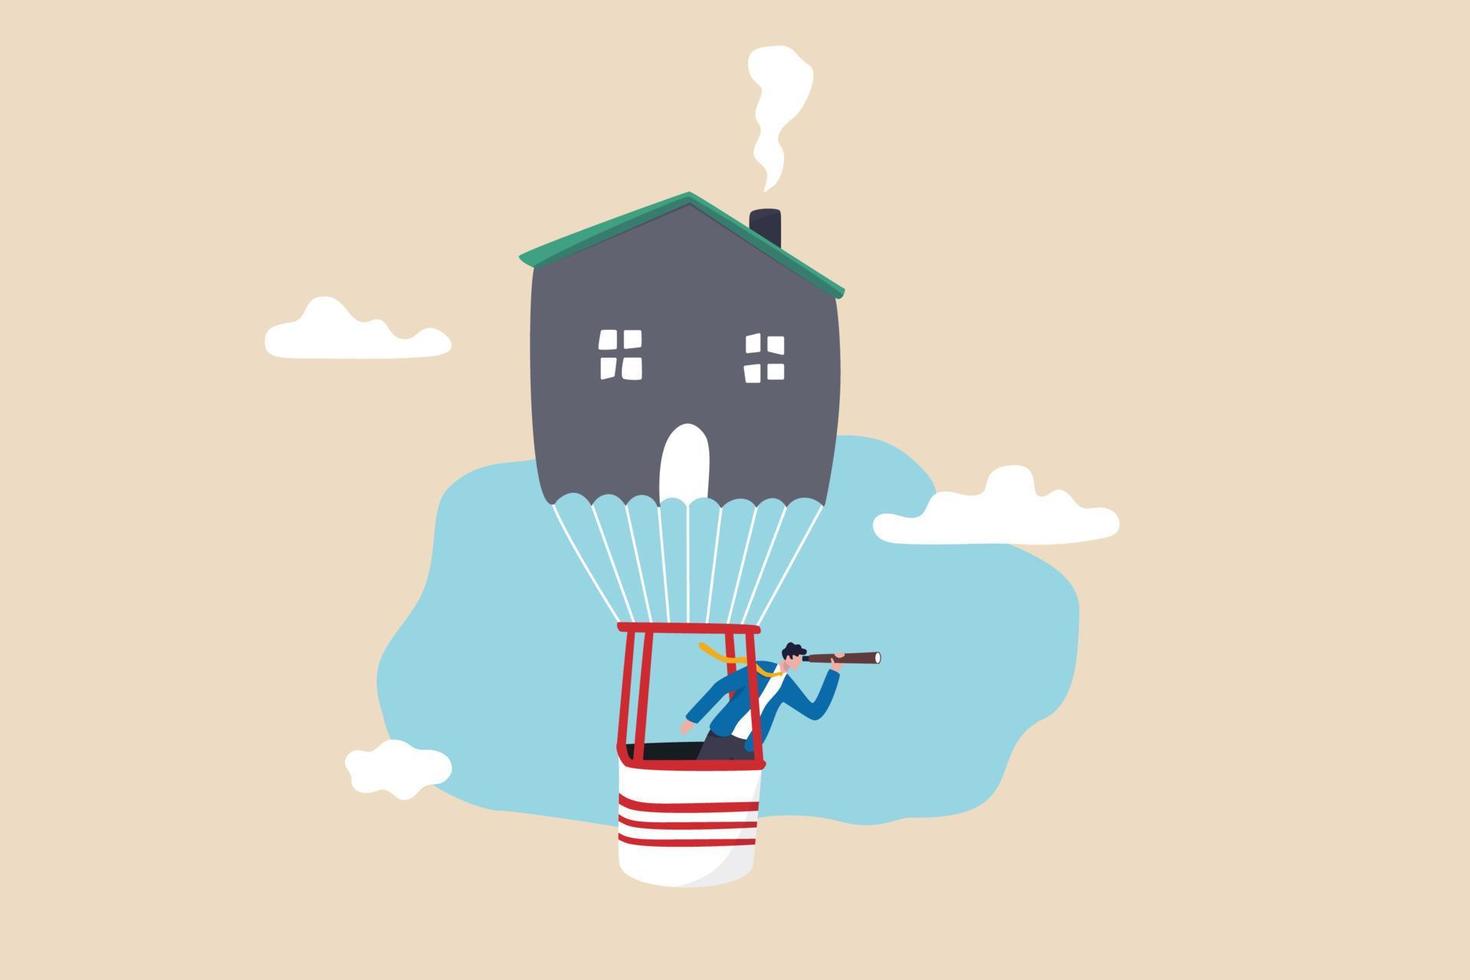 Finding new home or moving to new house, search or discover real estate or property profit, visionary or idea for buy, rent or mortgage loan, smart businessman flying on house balloon to see vision. vector